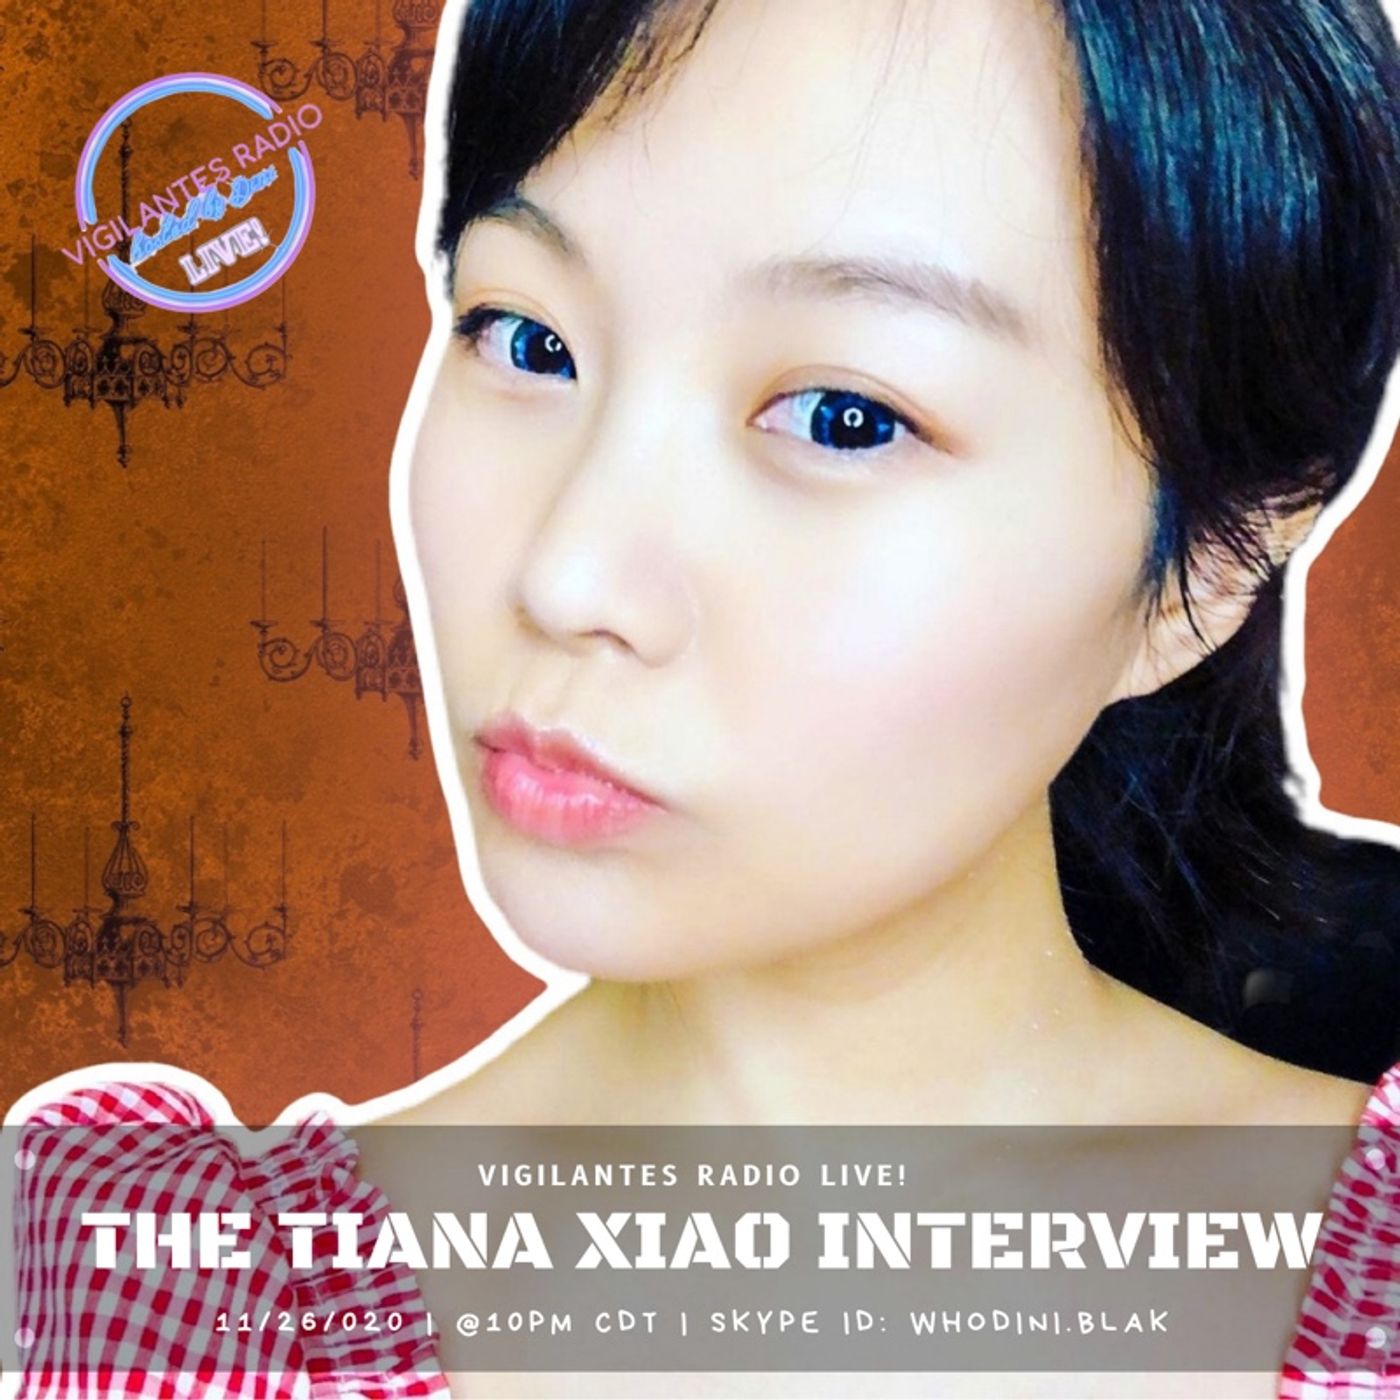 The Tiana Xiao Interview. Image